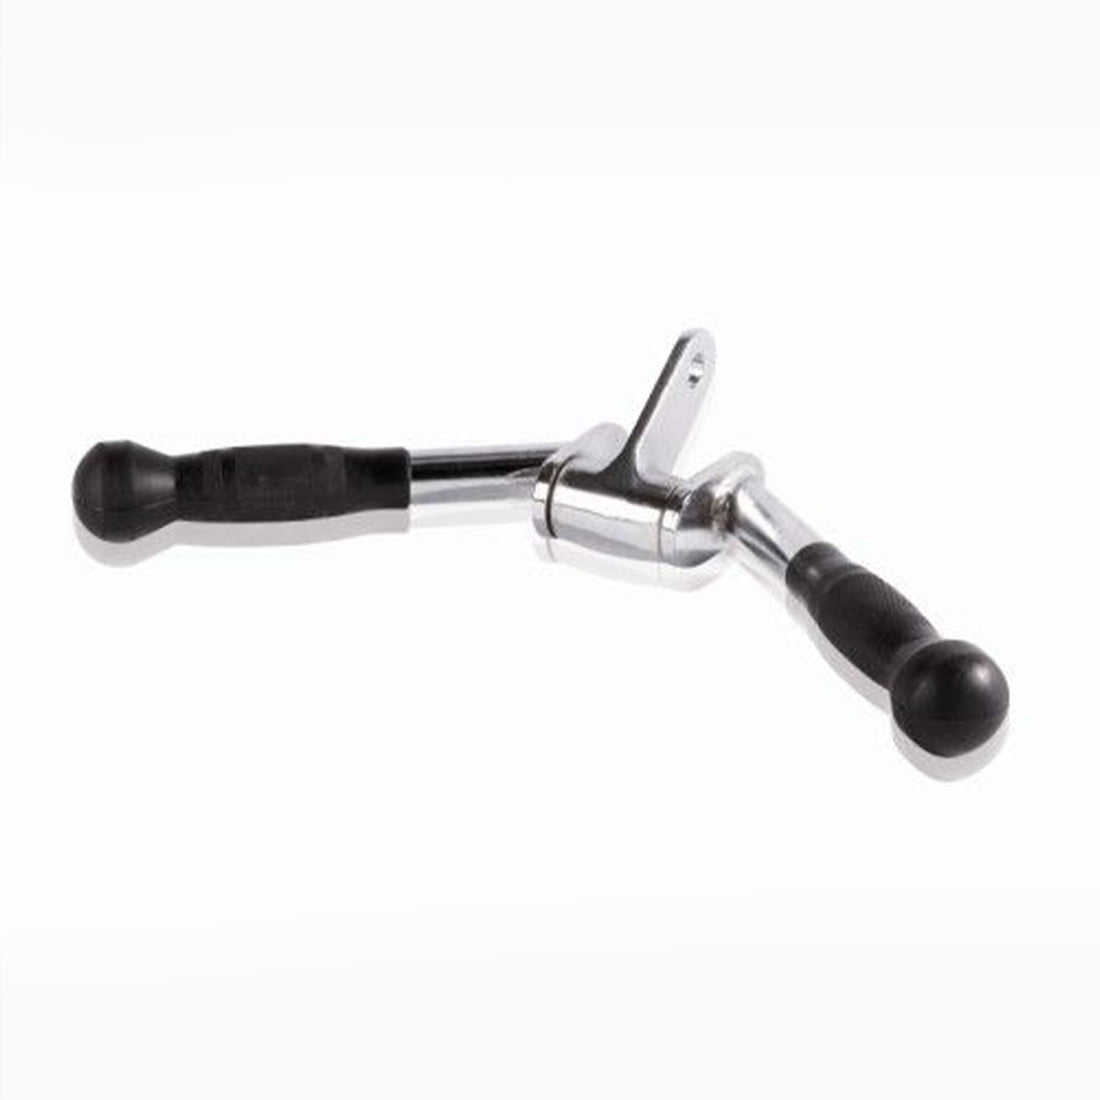 LivePro Tricep V-Bar Rotating | Two knurl-textured rubber grips